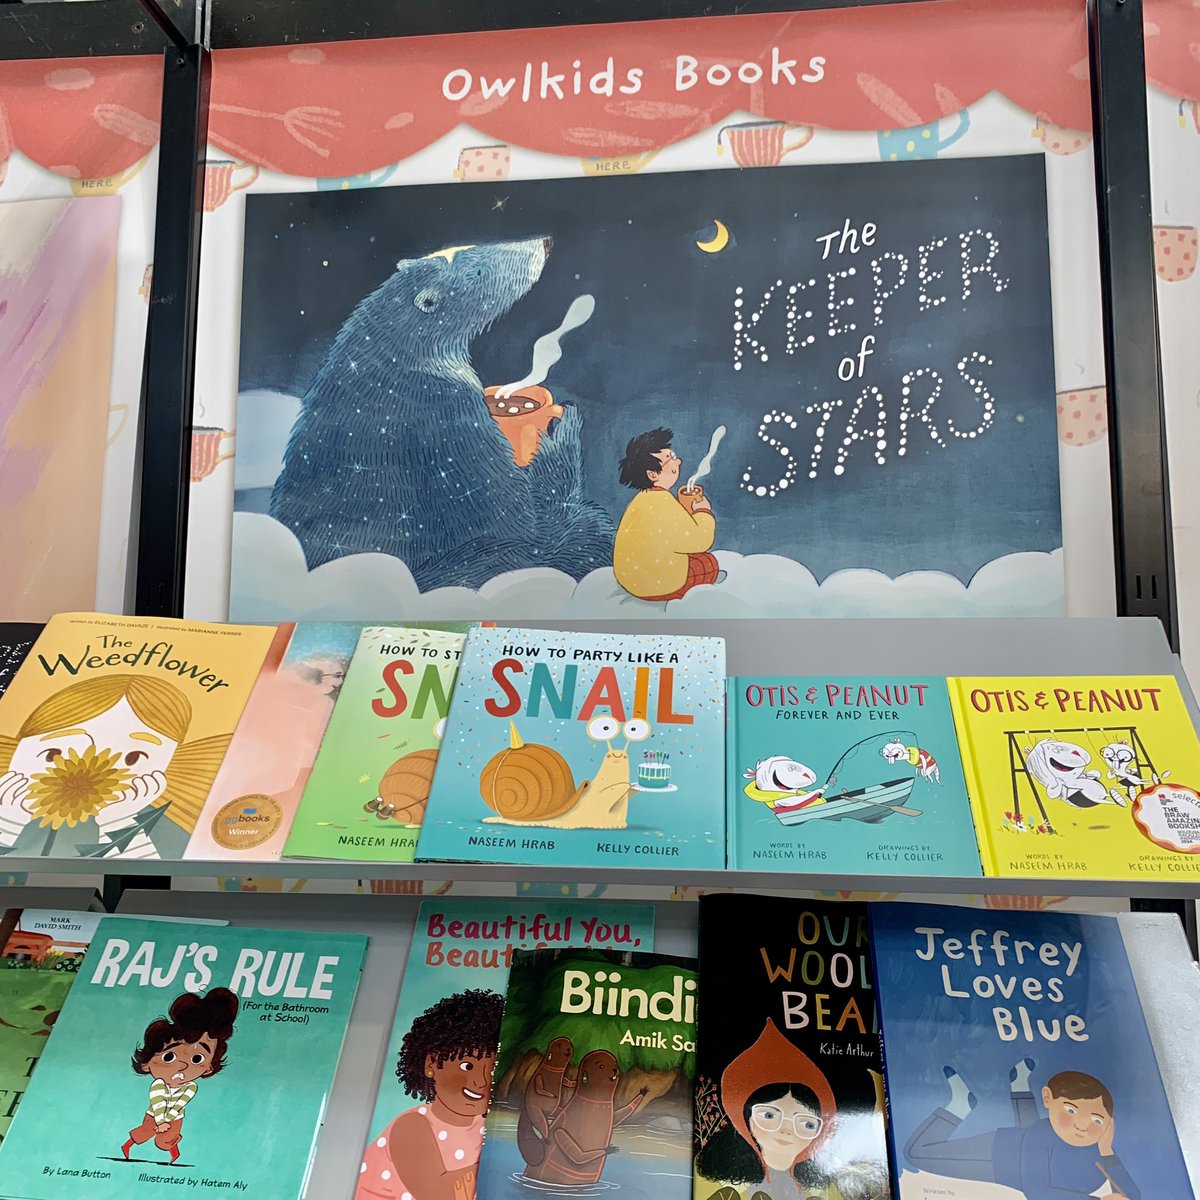 Seeing more of my favorite books at the Bologna Children‘s Book Fair! #BCBF24 @BoChildrensBook @JeanneWHarvey @valerie_bolling @JyotiGopal @naseemhrab @NorthSouthBooks